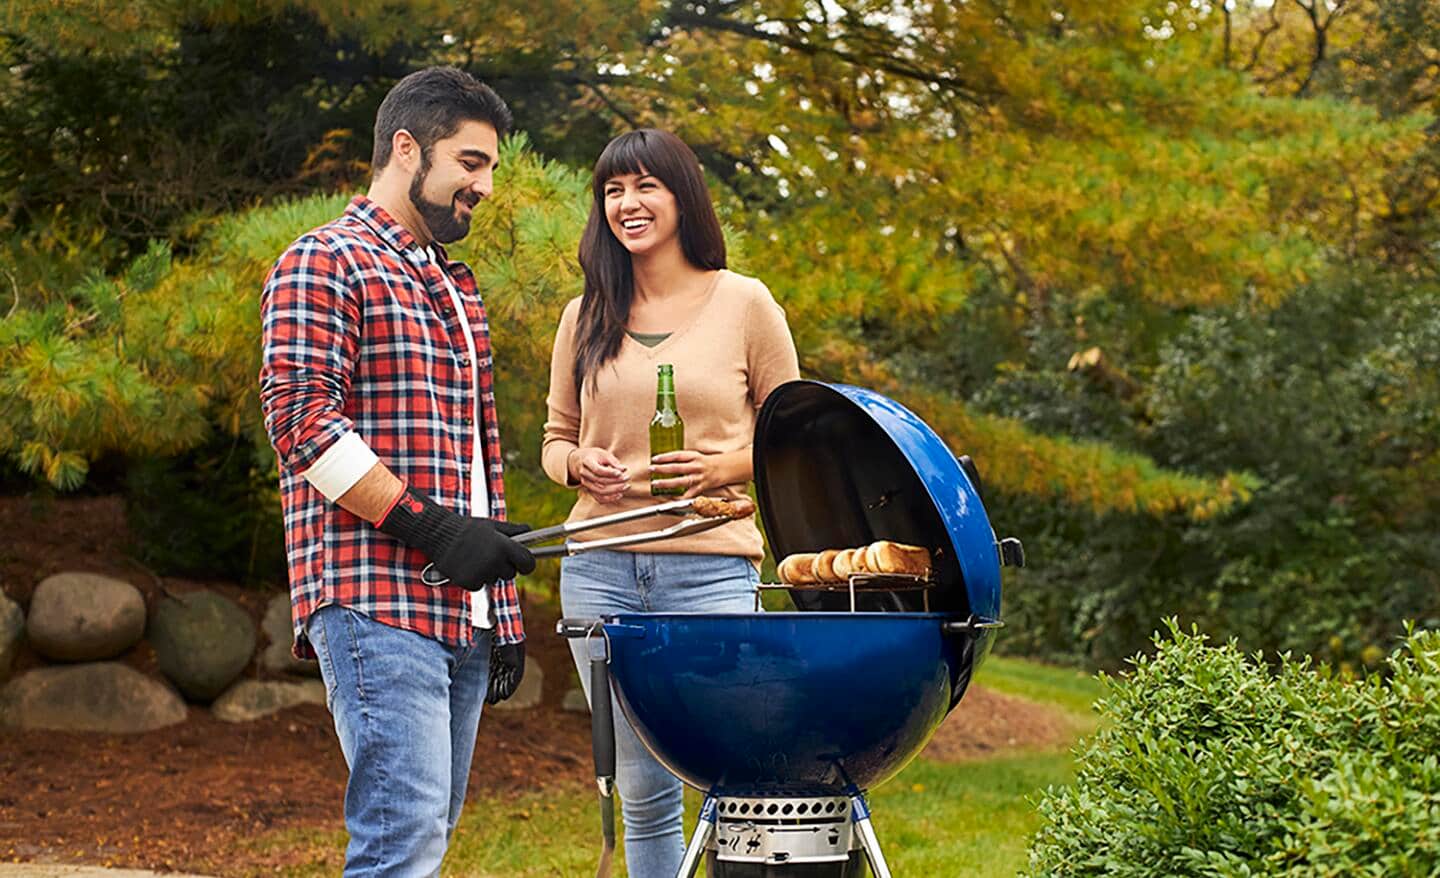 A man and a woman cook on a blue charcoal kettle grill on a patio.